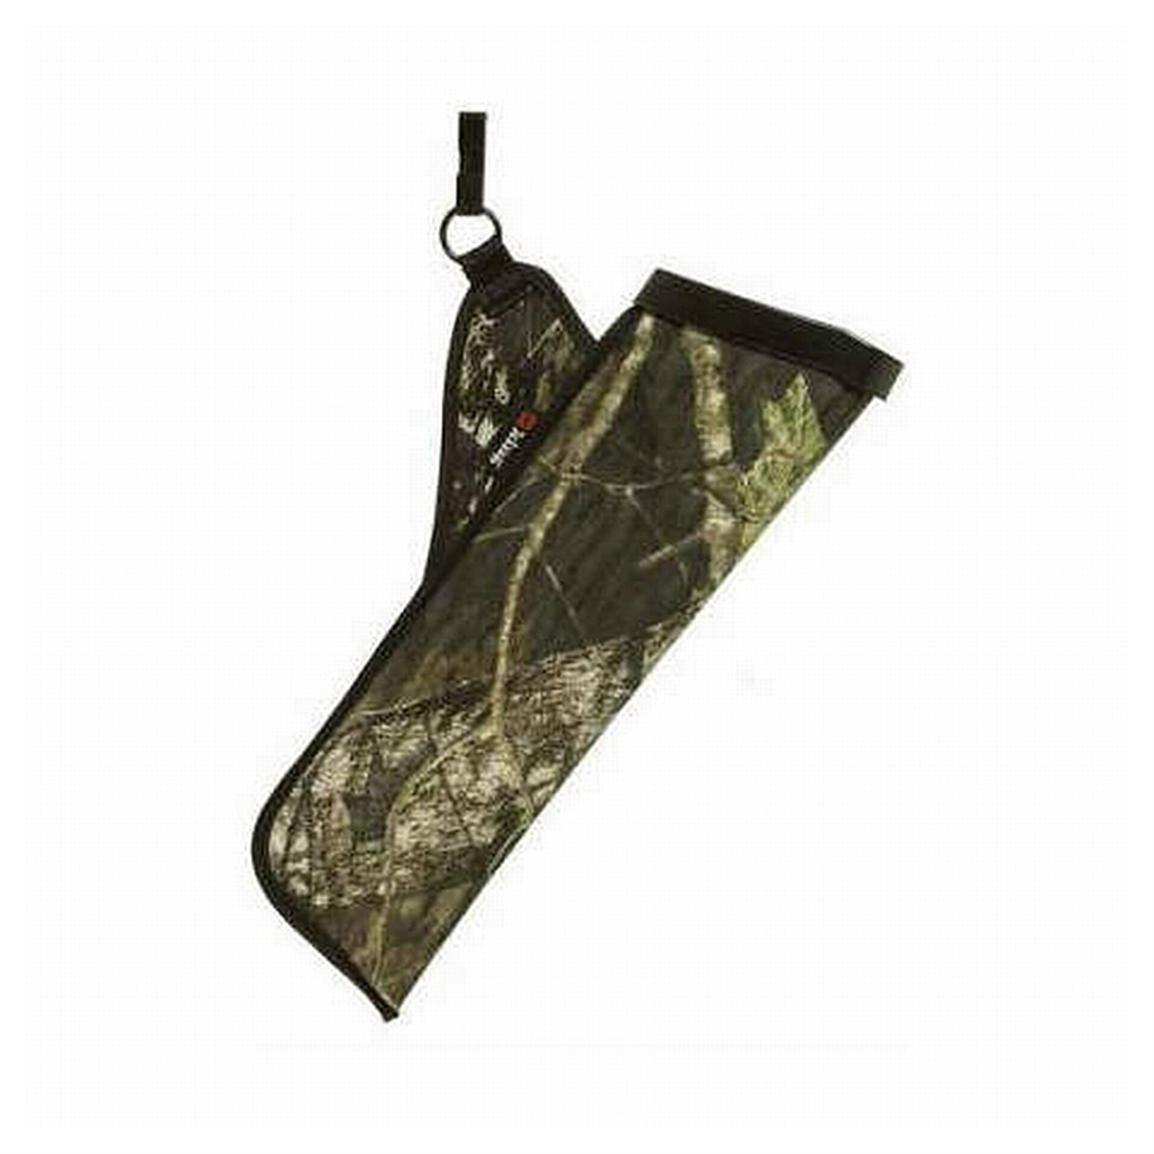 King Supreme XL Camo Quiver - 579175, Quivers at Sportsman's Guide